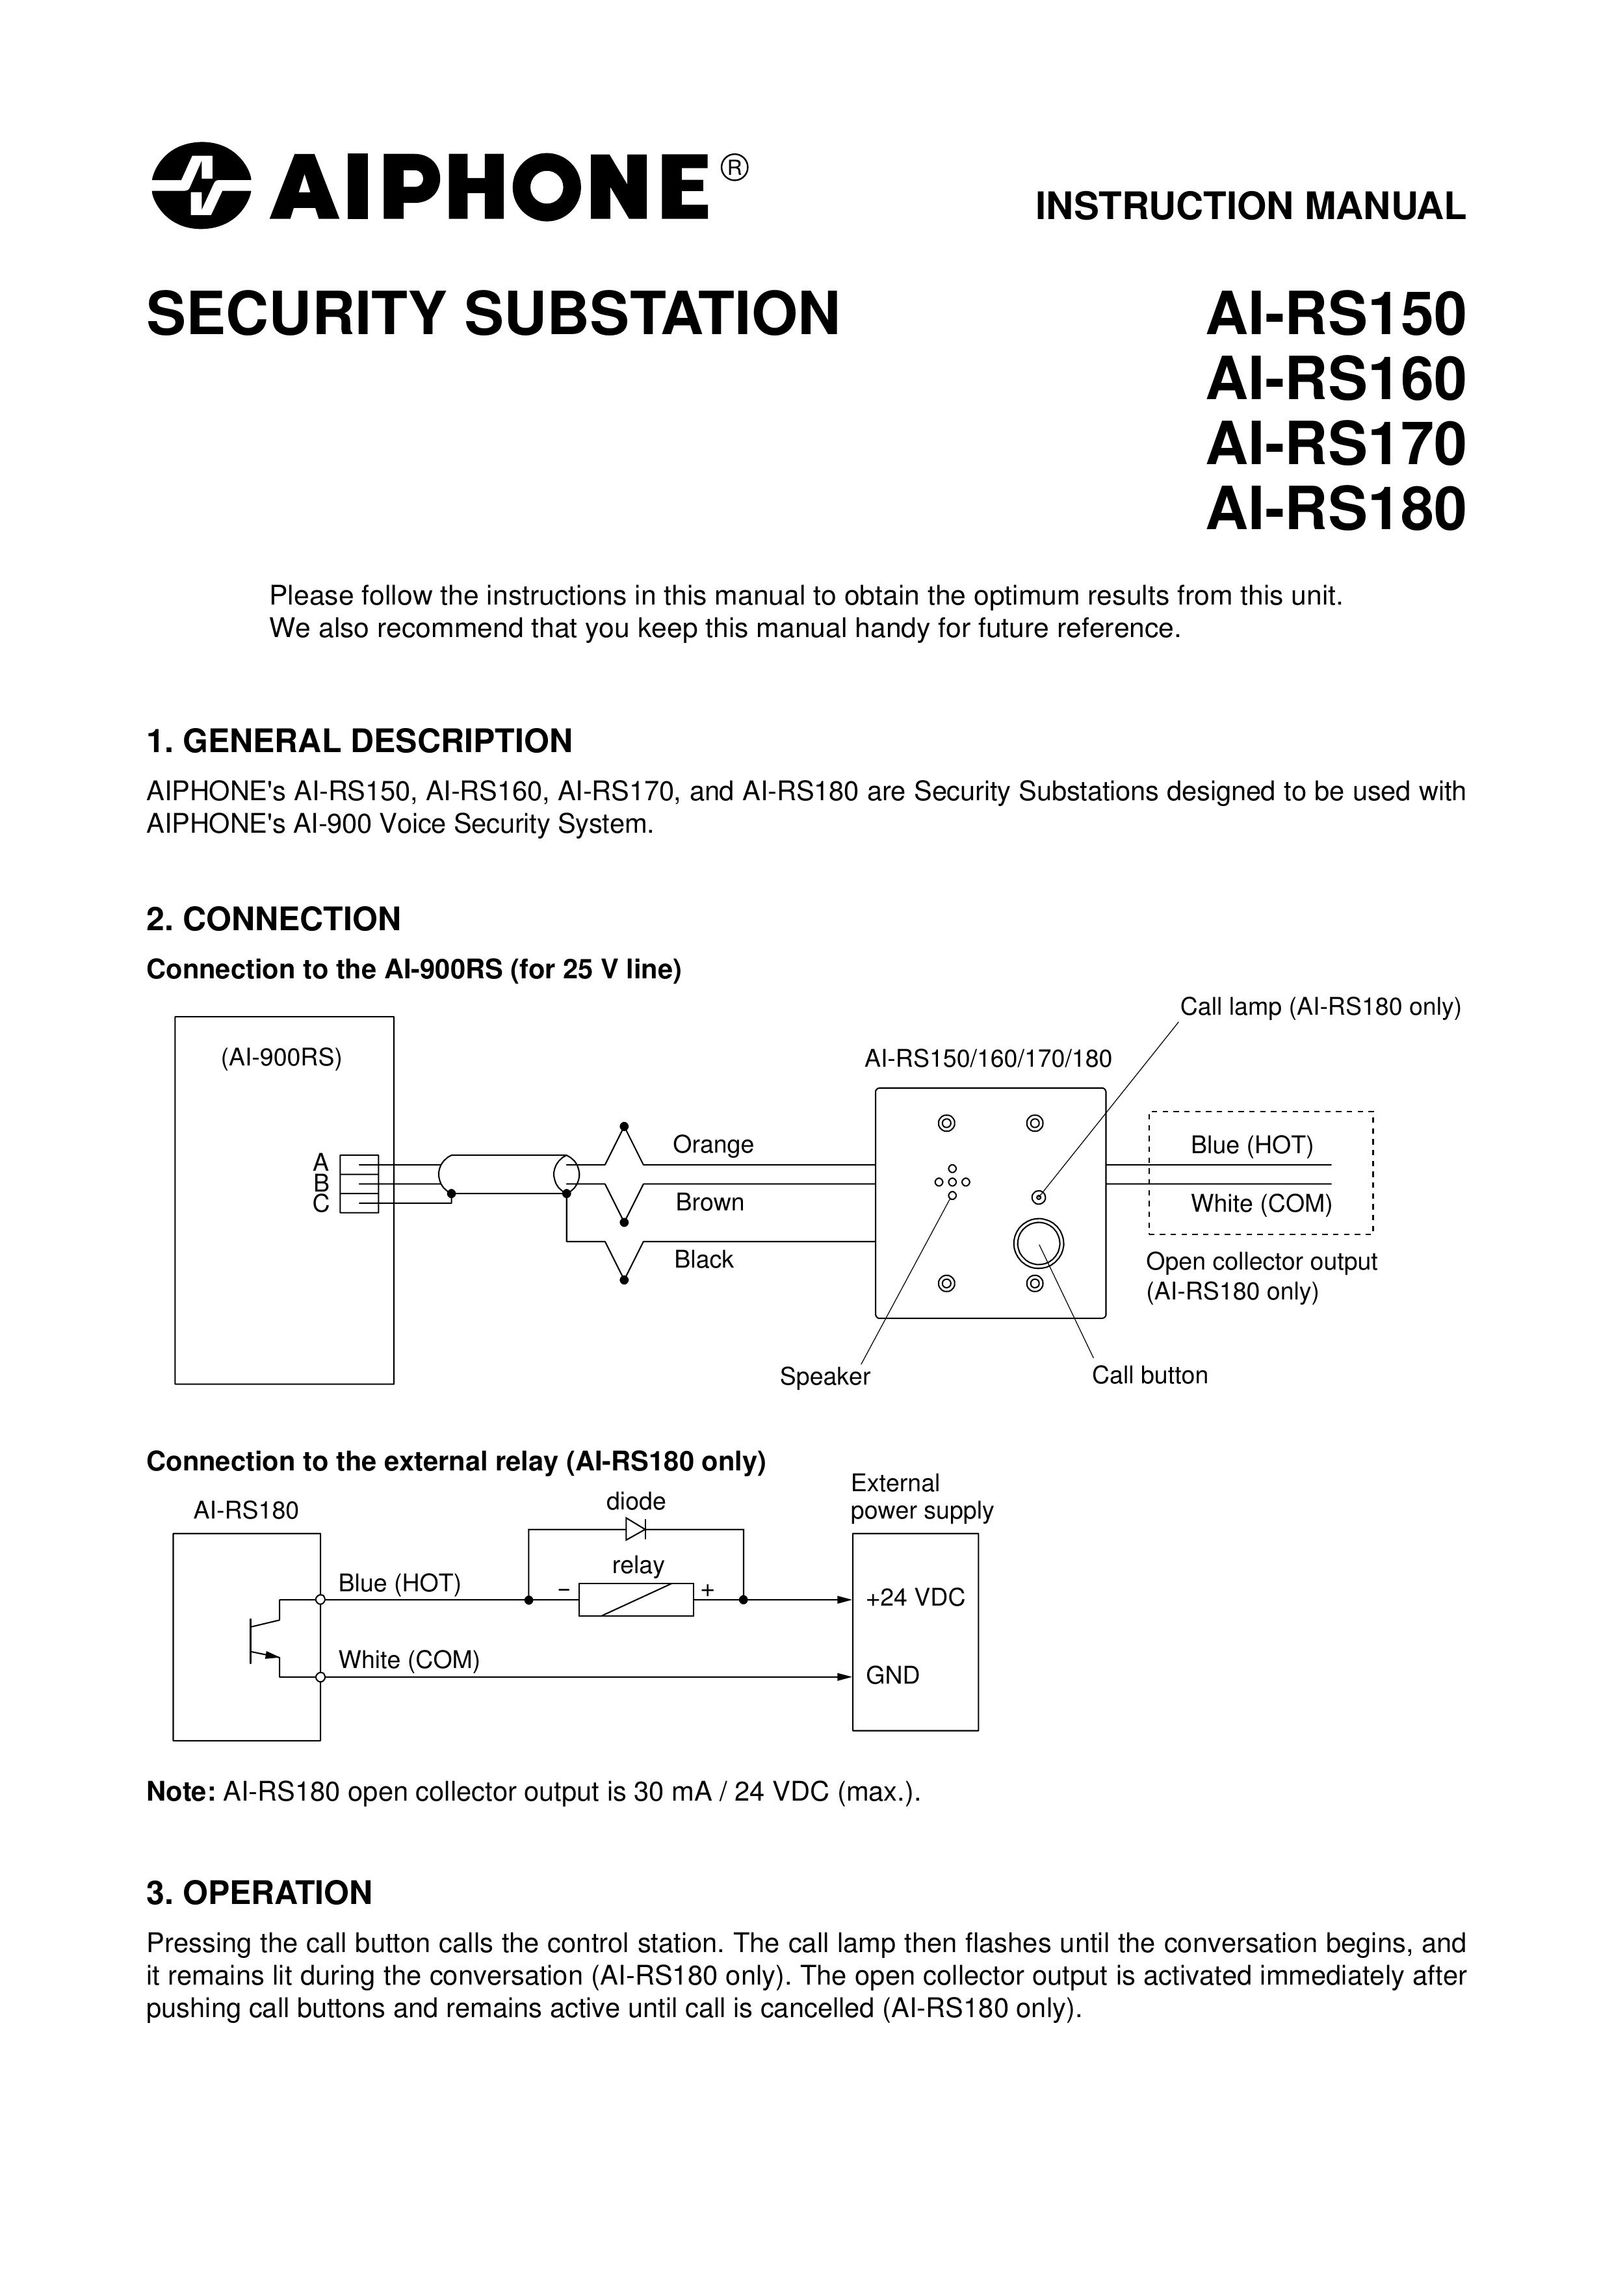 Aiphone AI-RS150 Home Security System User Manual